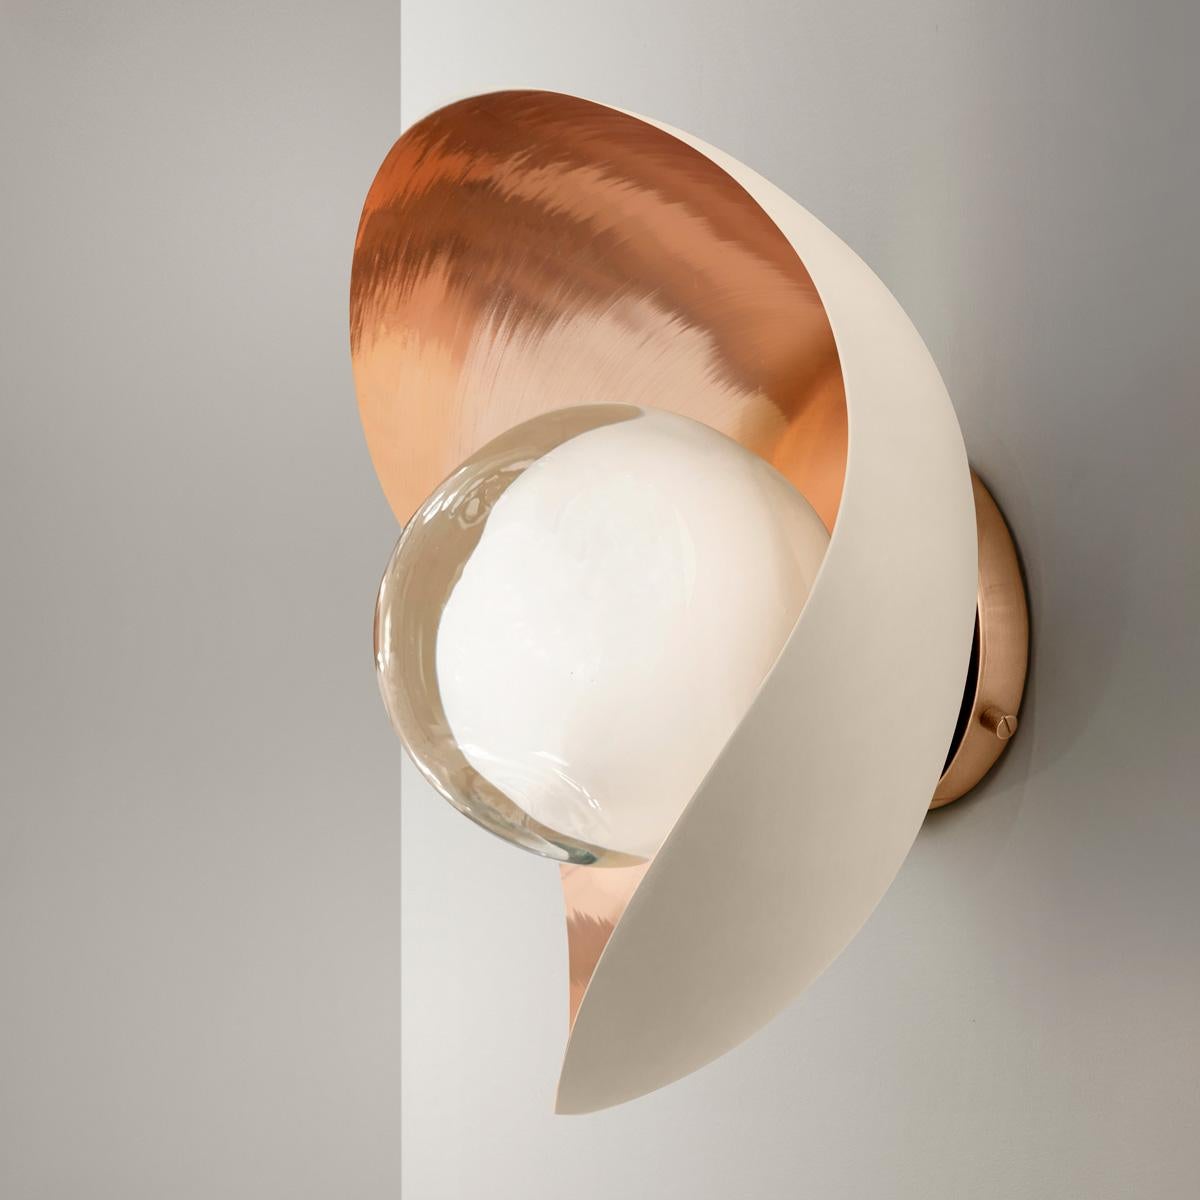 Perla Wall Light by Gaspare Asaro-Polished Copper and Sand White Finish In New Condition For Sale In New York, NY